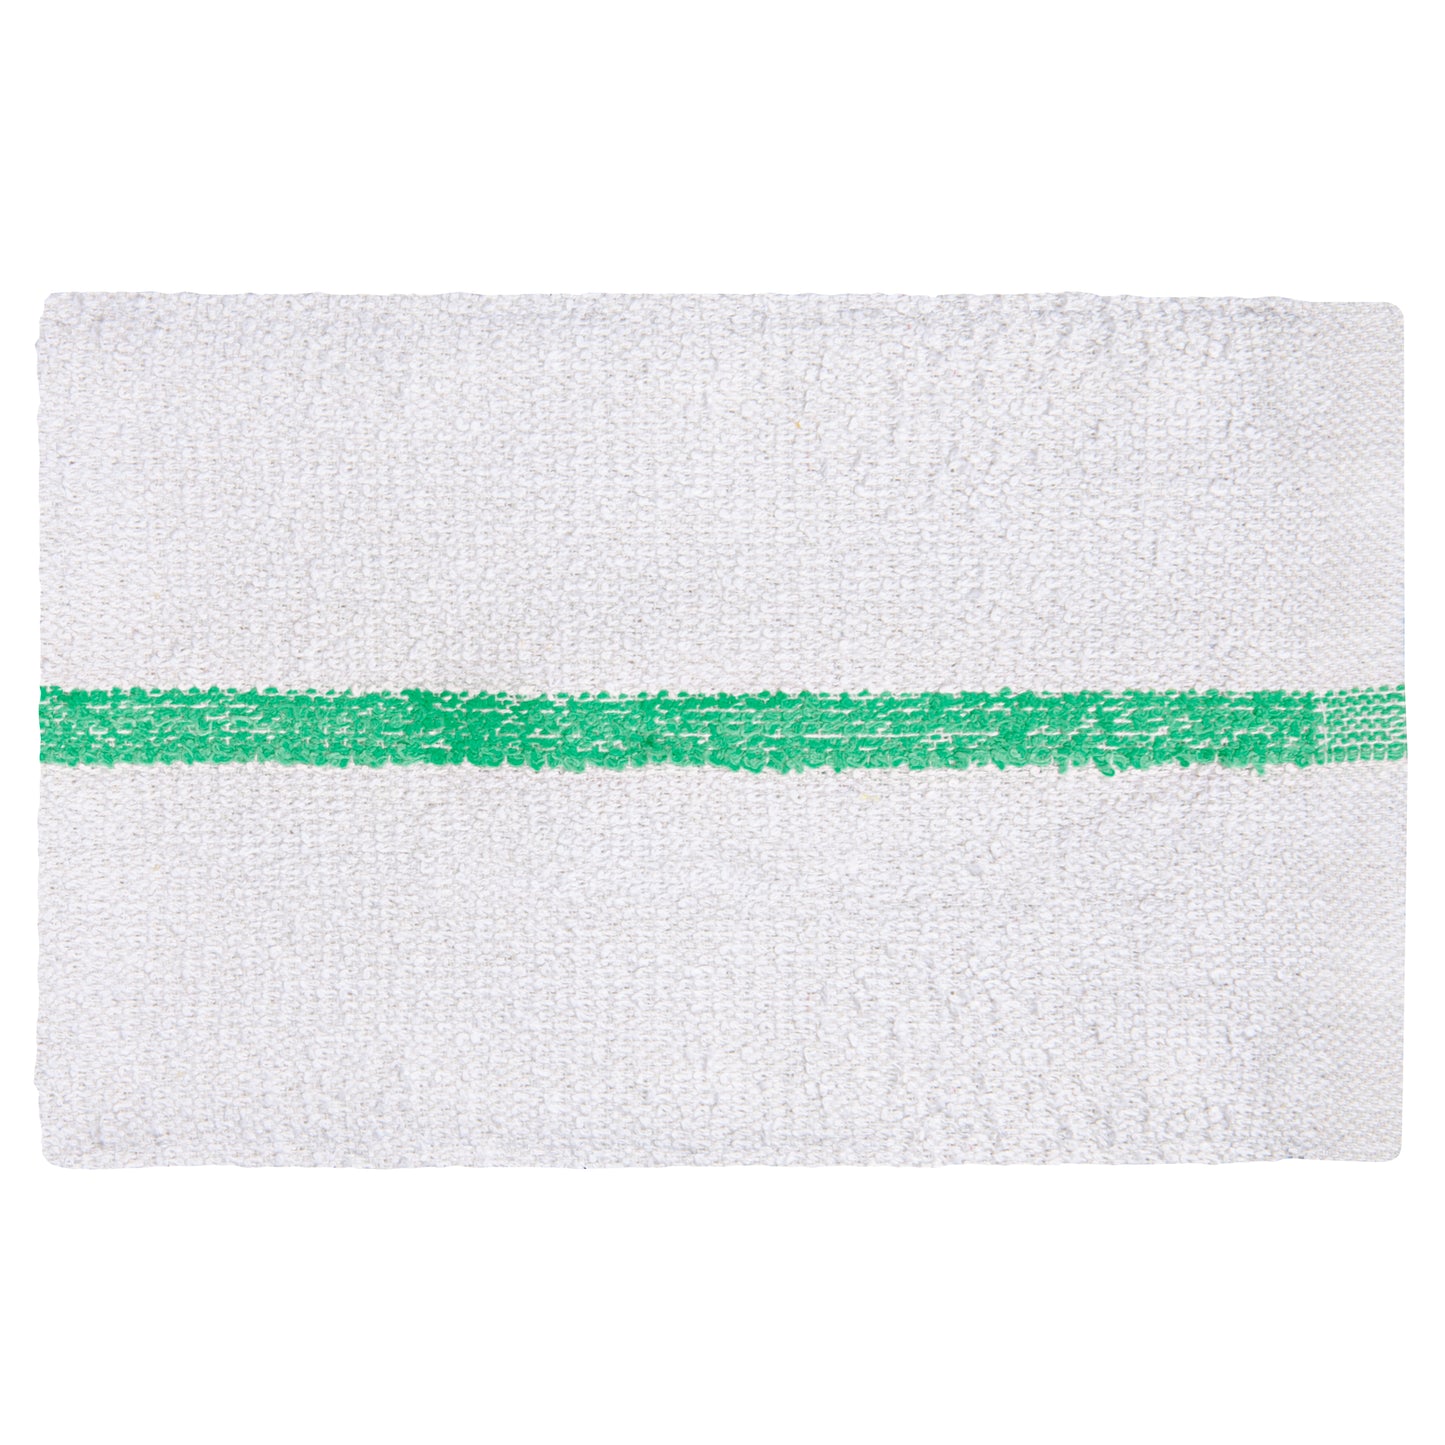 Terry Bar Mop Towel, 16x19 inch, White with Green Center Stripe